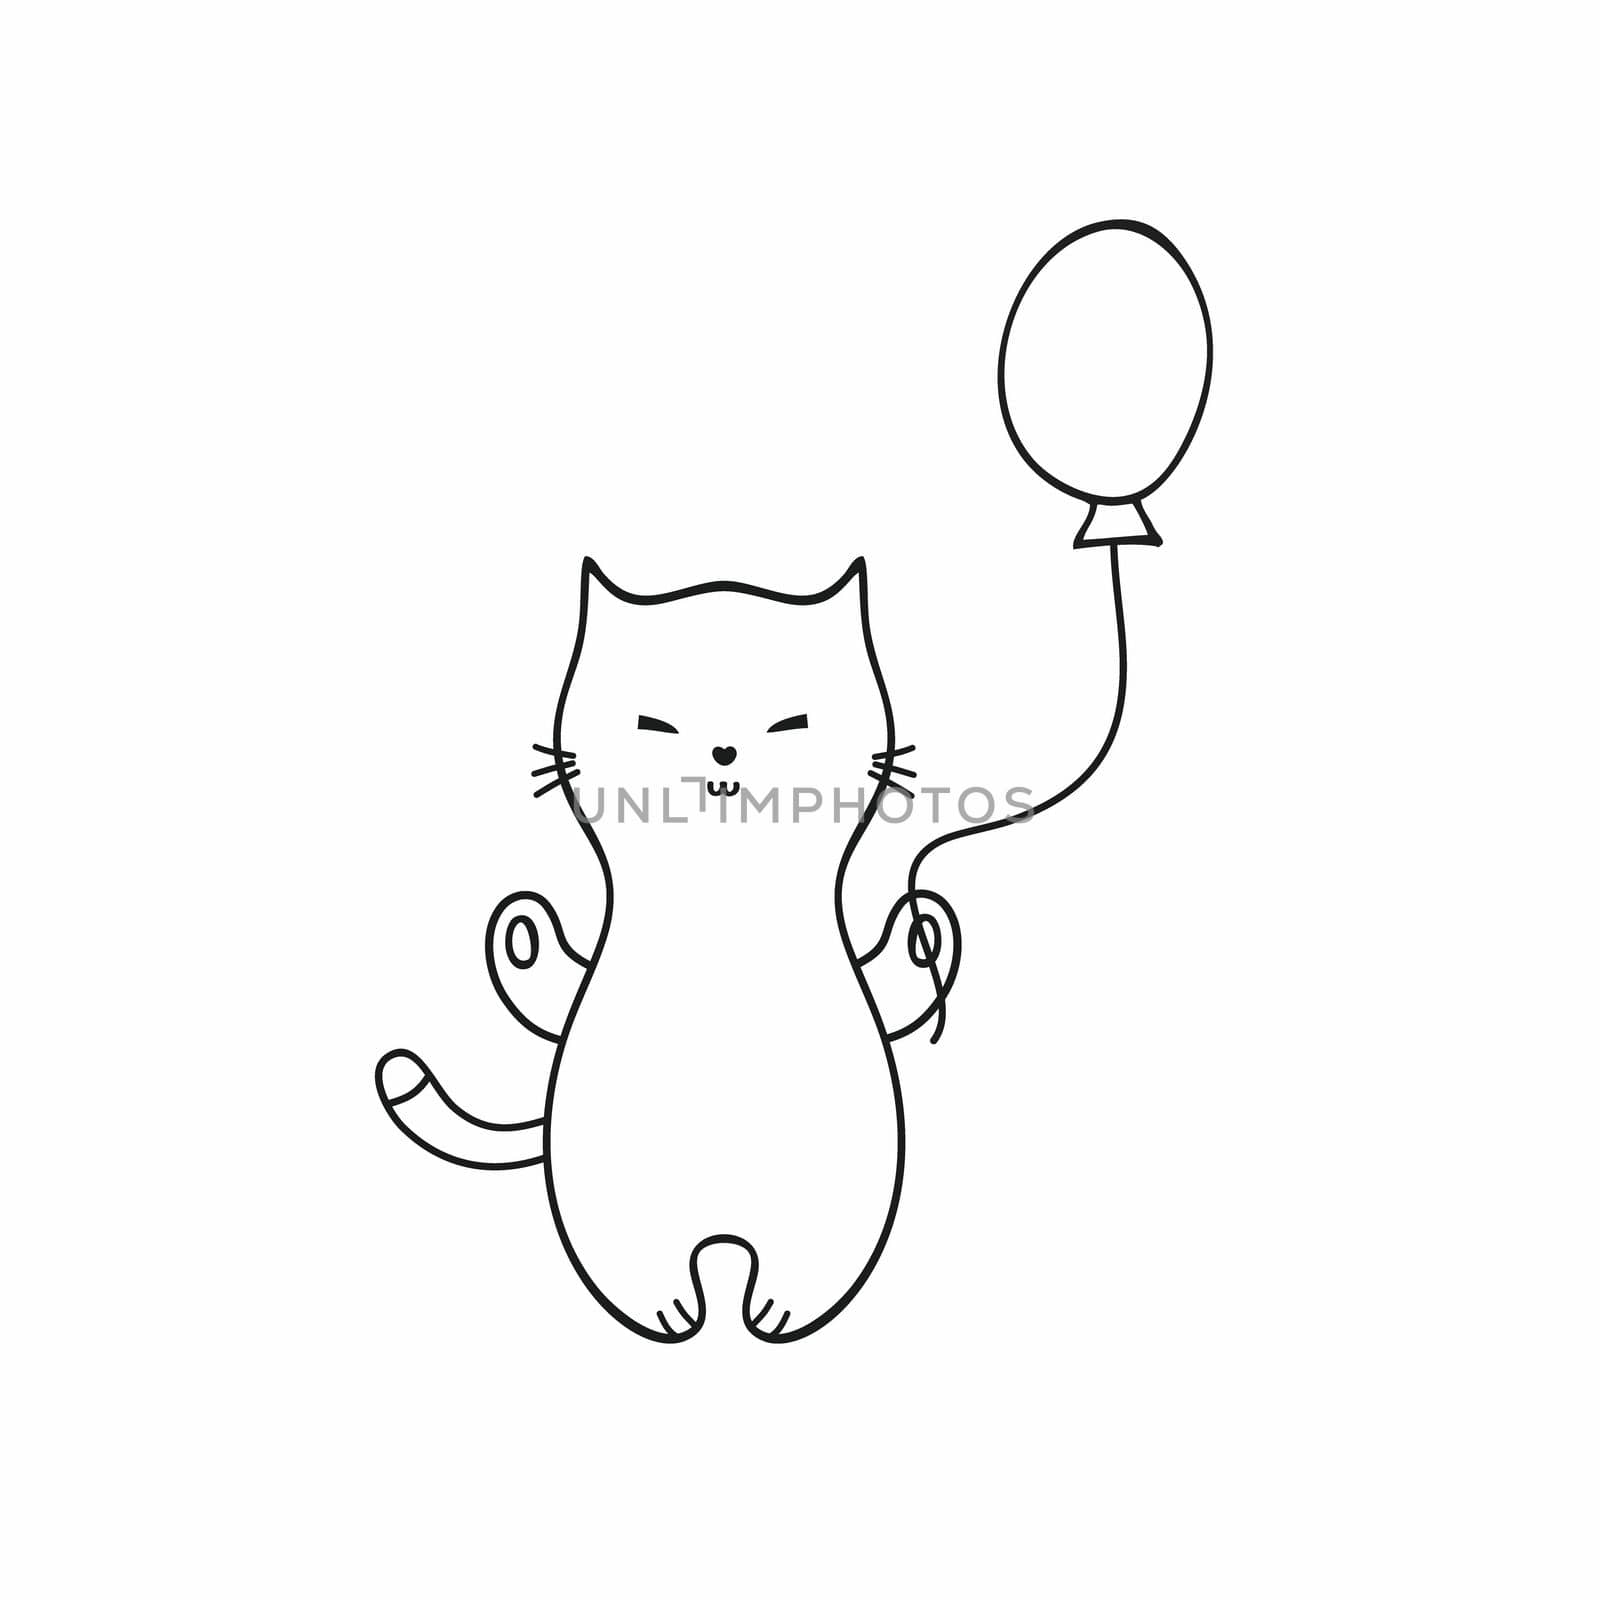 A kitten with a Doodle-style balloon. Minimalist cat isolated on a white background in an abstract style. Hand-drawn illustration, black-and-white linear sketch. Vector drawing for children by polinka_art